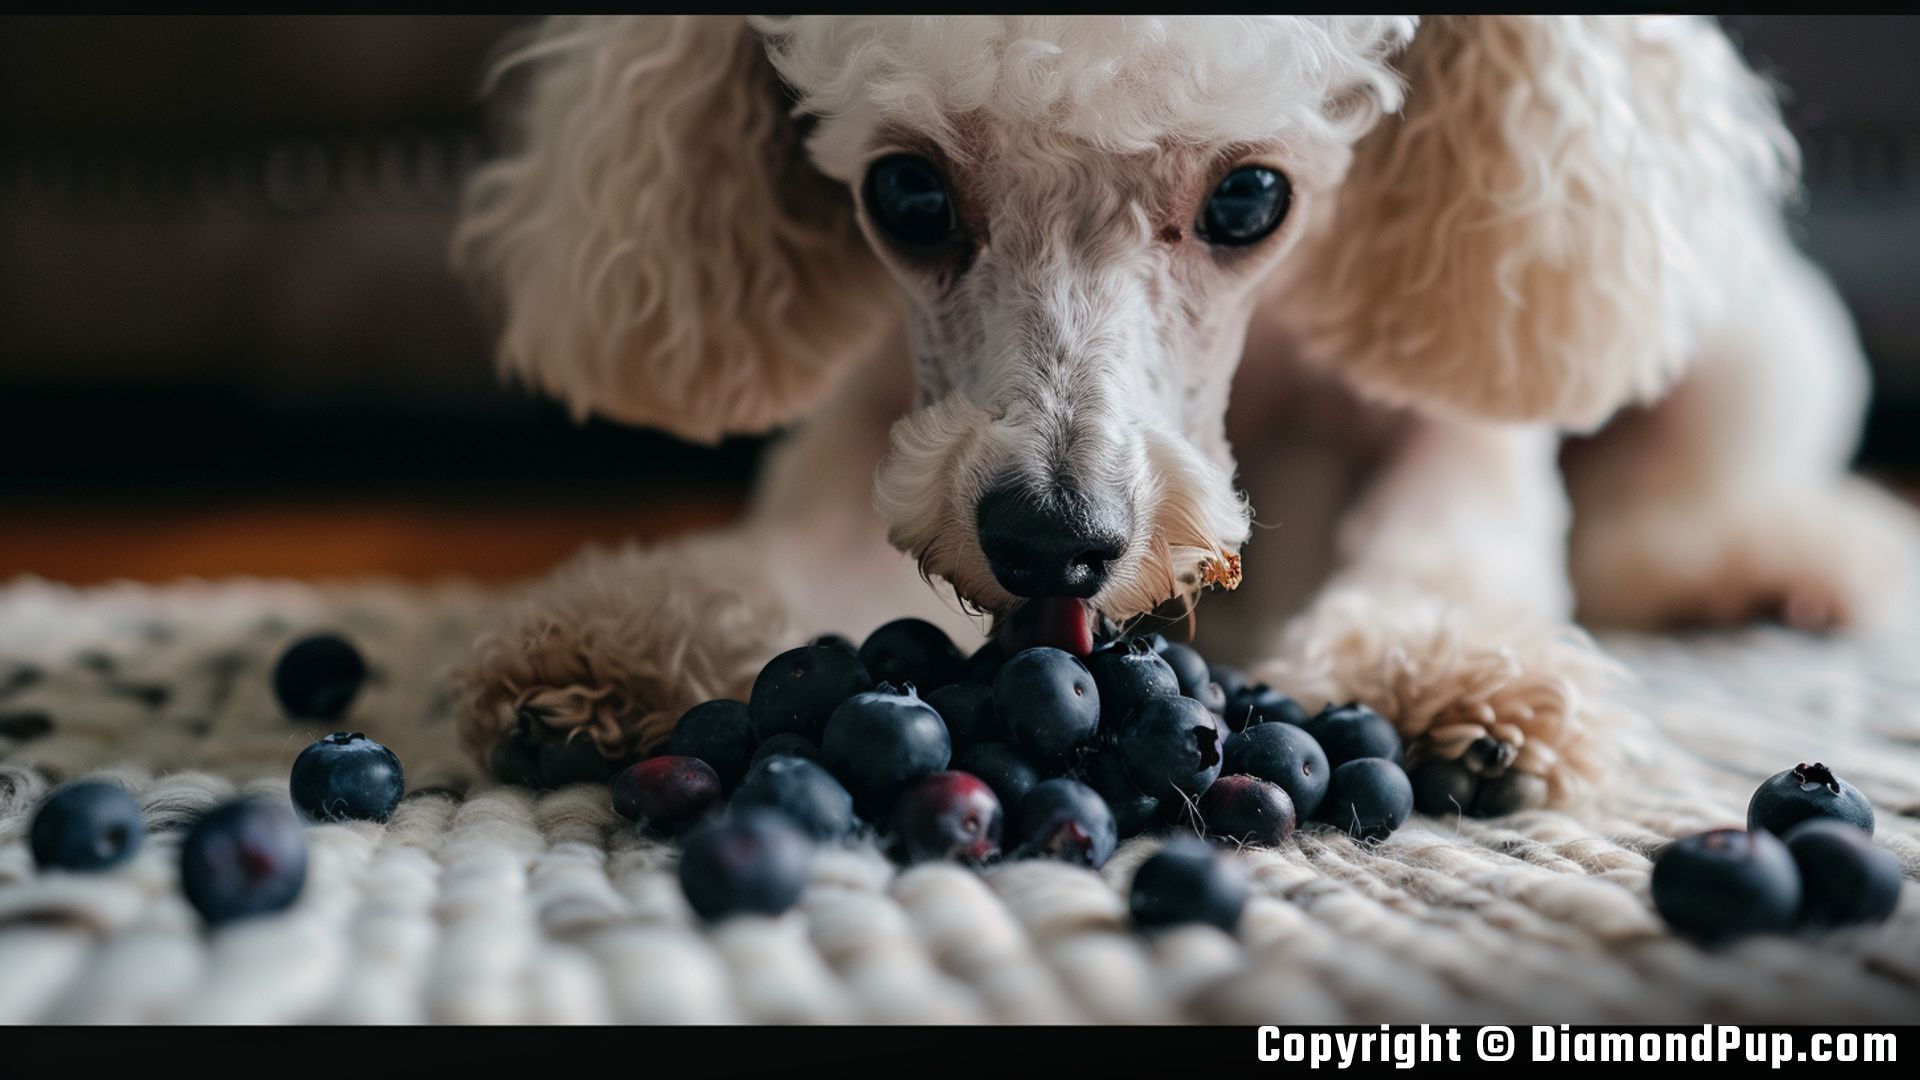 Photograph of a Cute Poodle Eating Blueberries